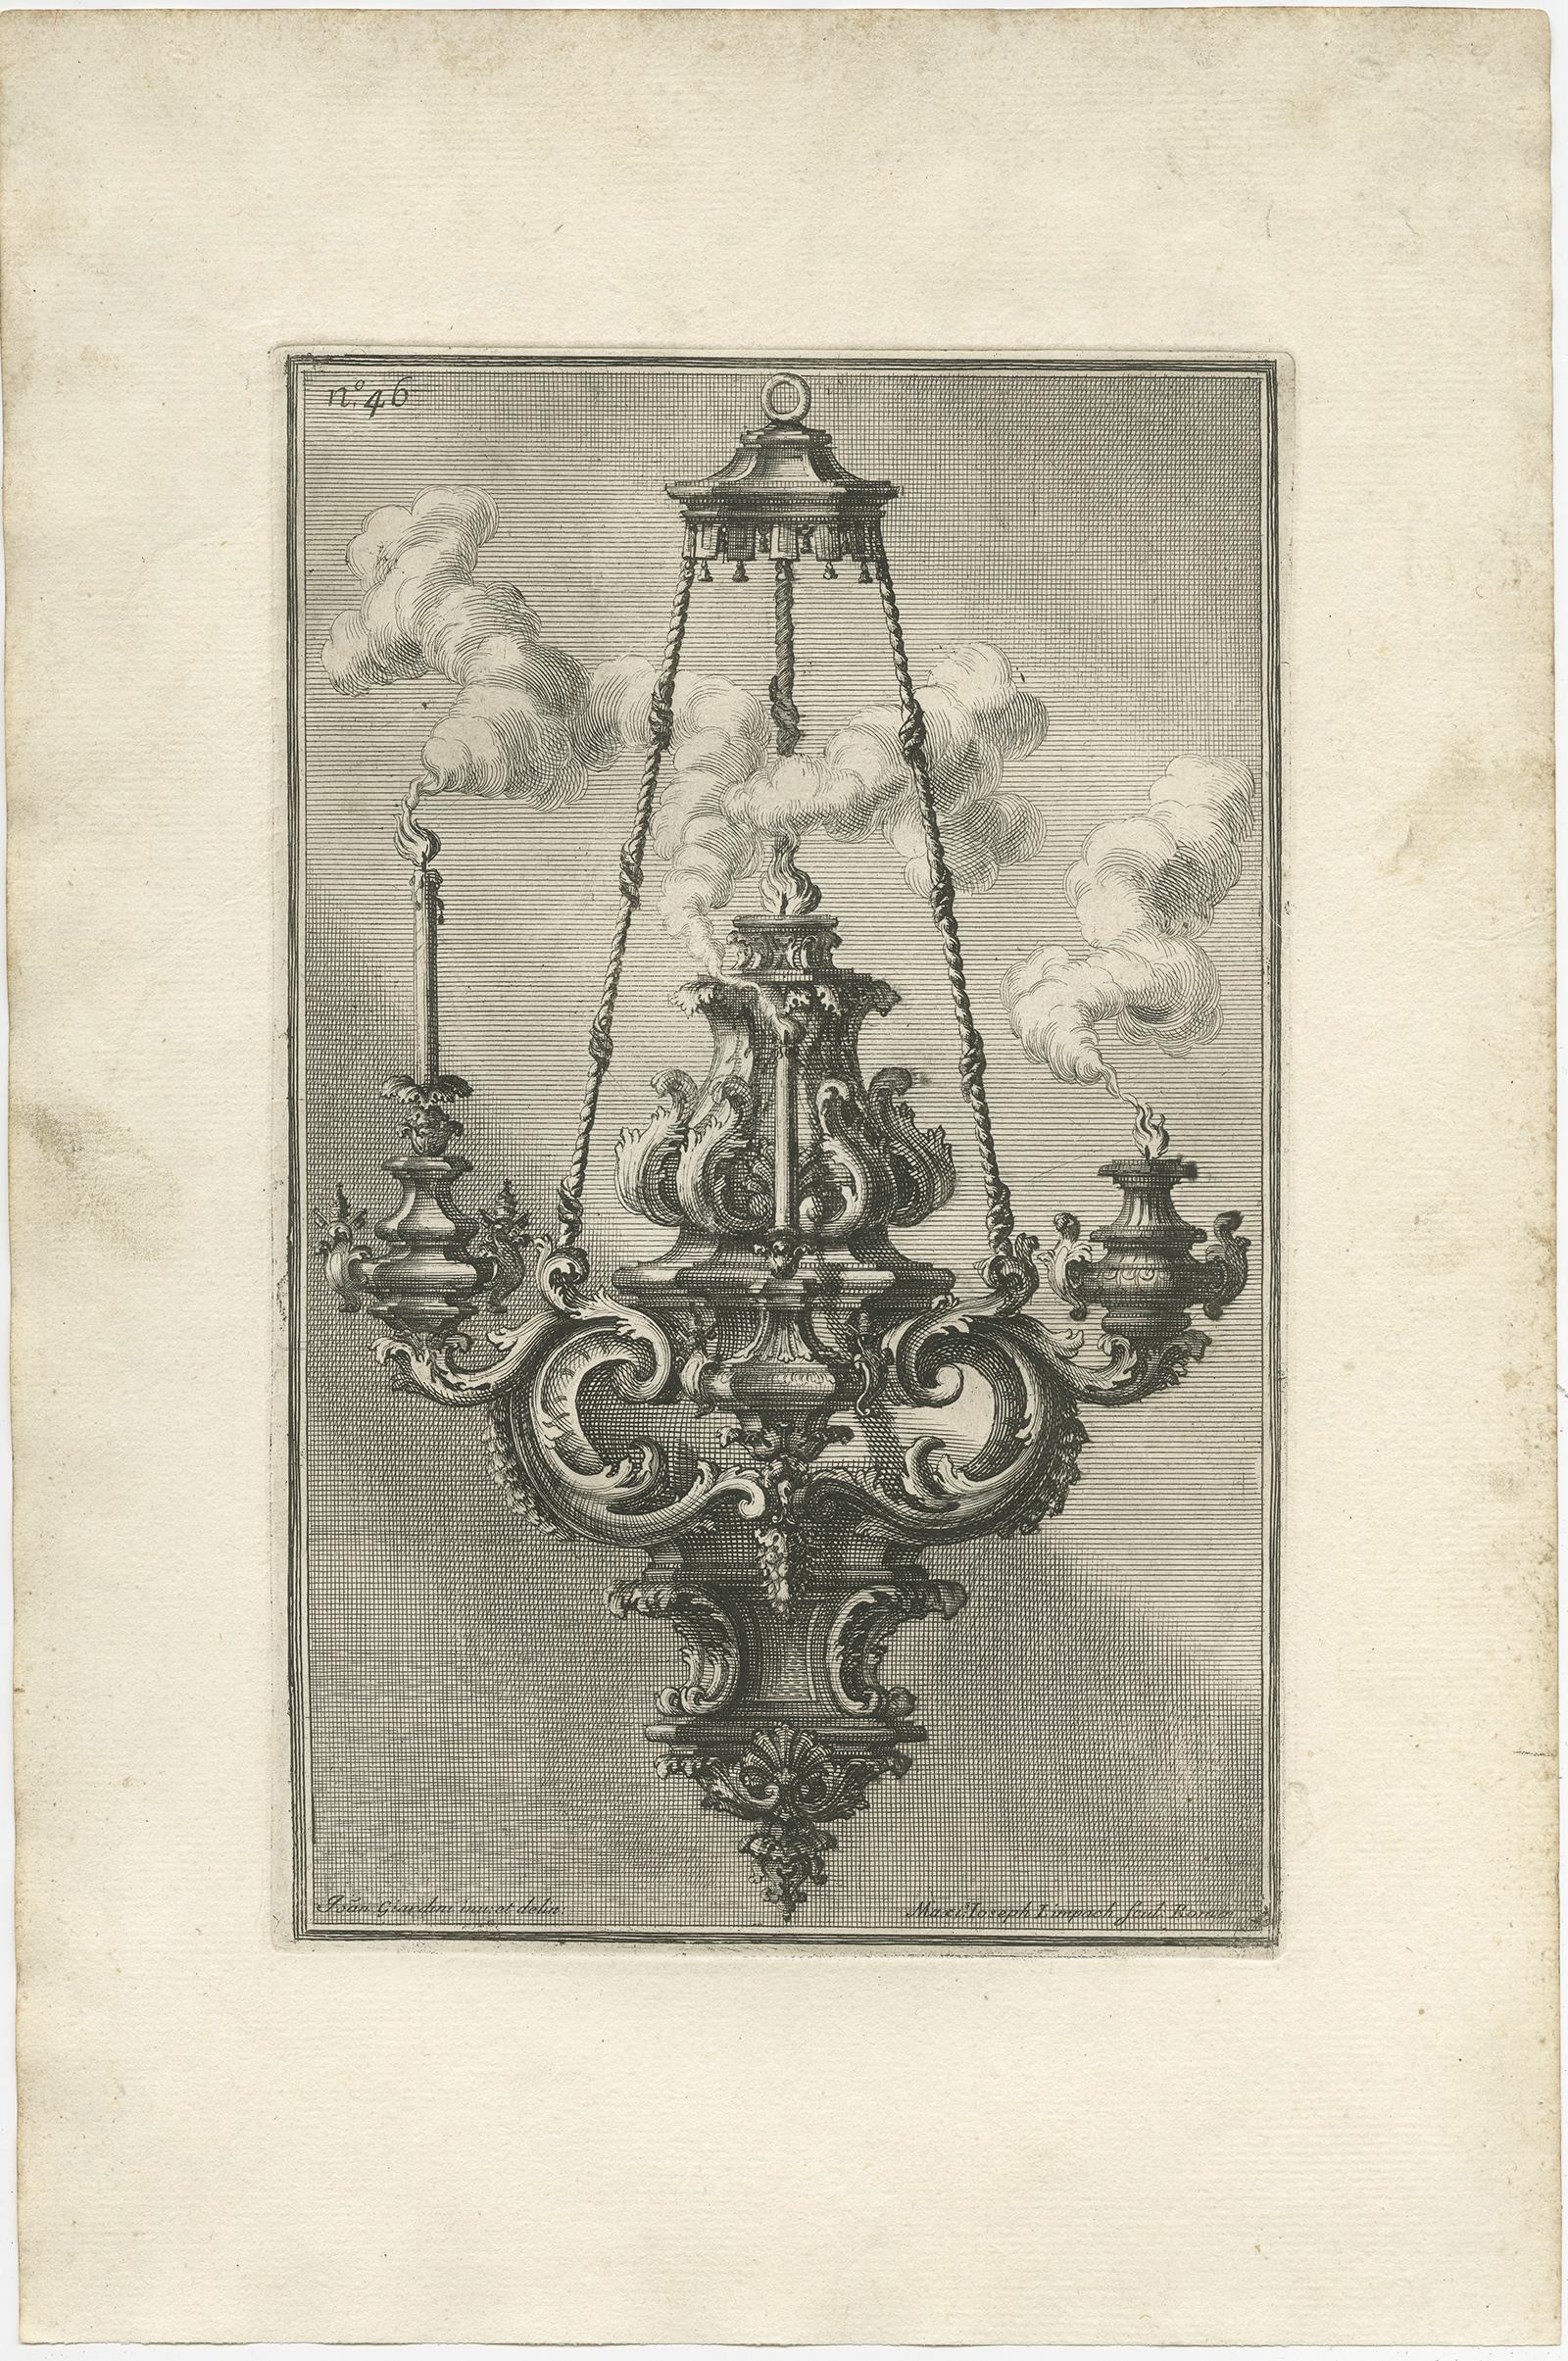 Paper Set of 10 Antique Prints of Designs of Chandeliers, Ornaments and Decorations